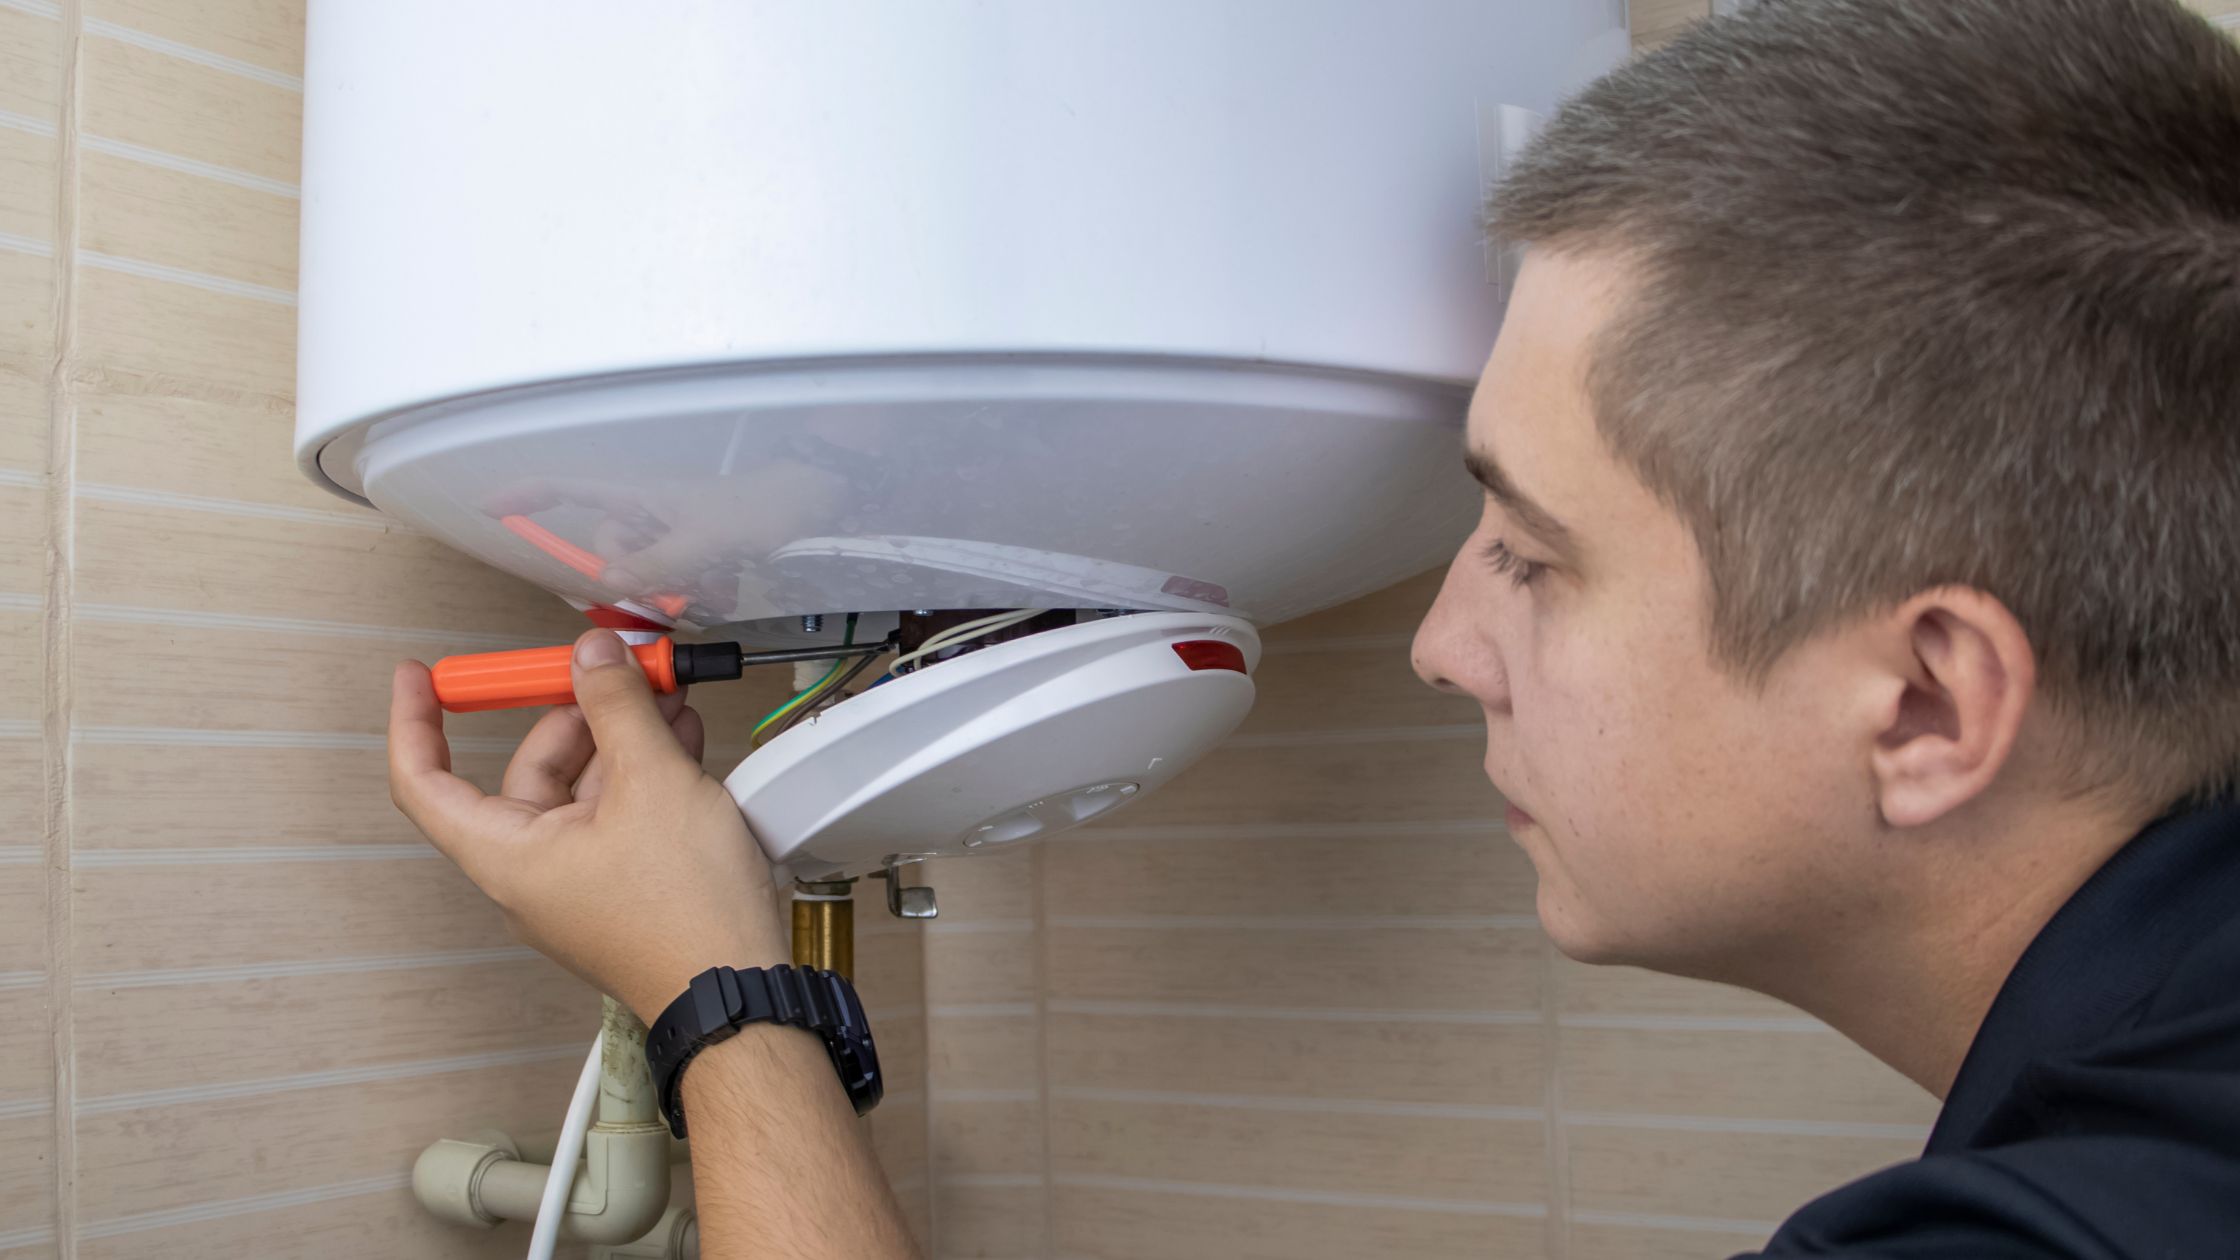 Guide on How to Replace Water Heater Element Without Draining